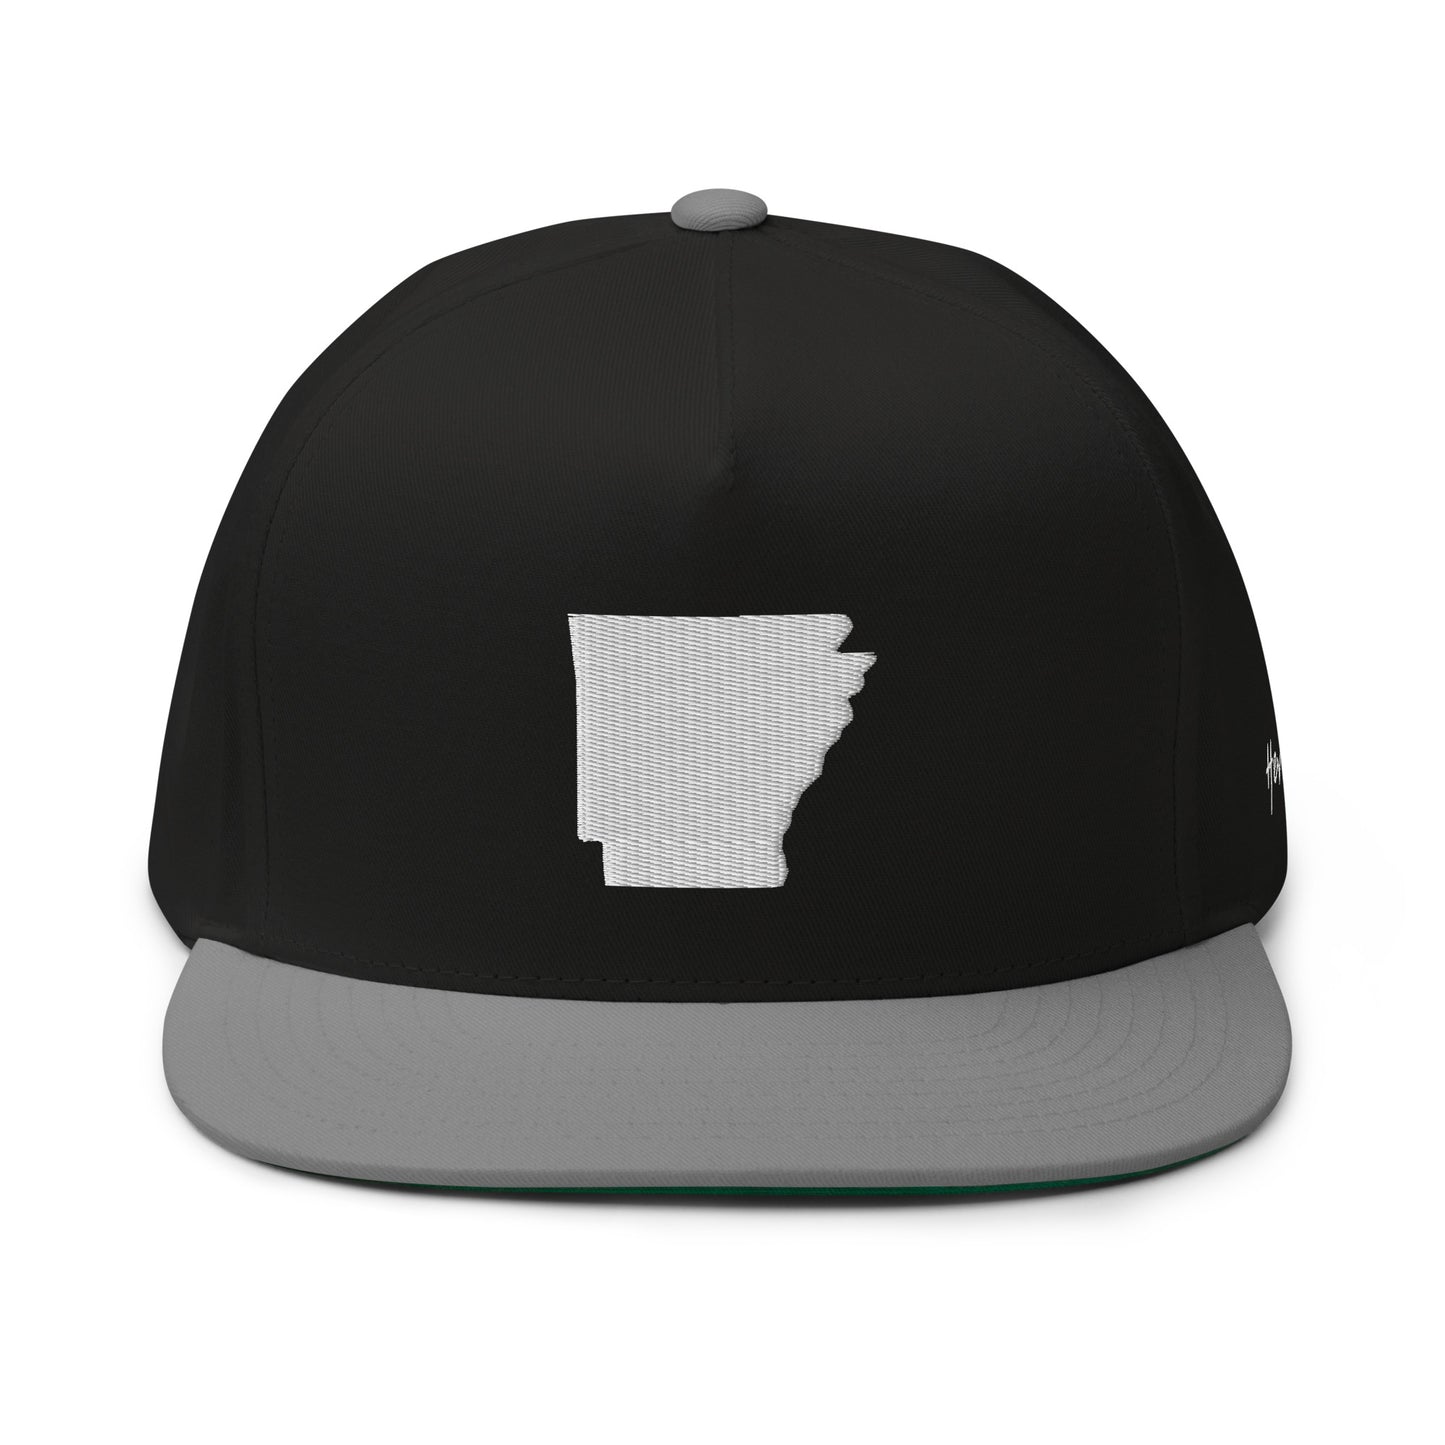 Arkansas State Silhouette 5 Panel A-Frame Snapback Hat